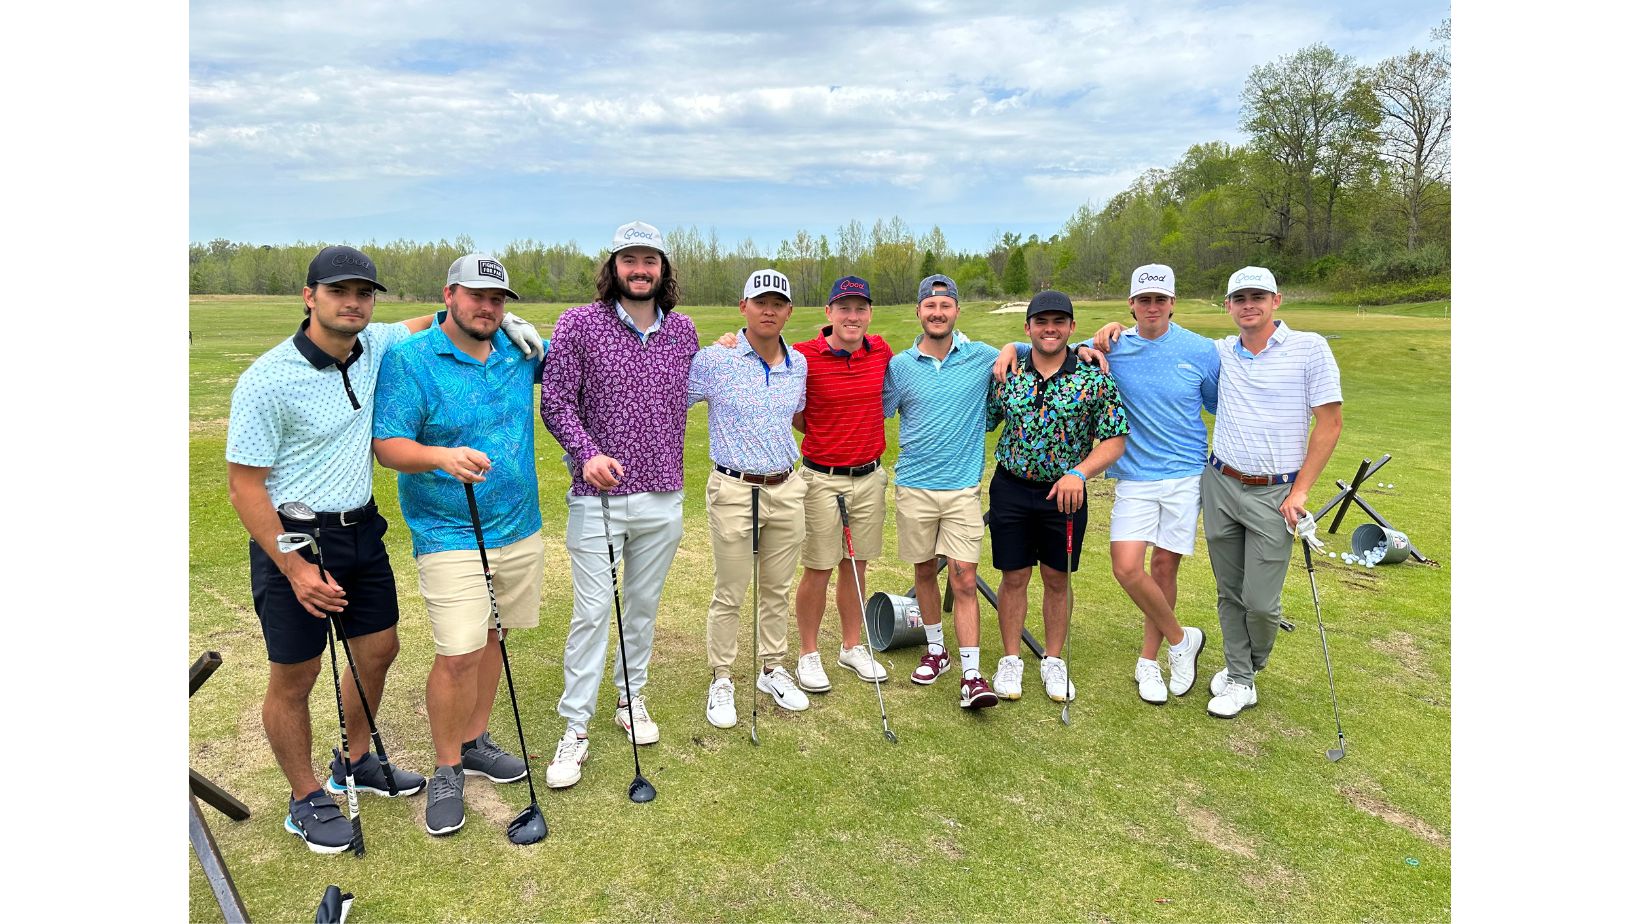 Good Good golf group plays at Dalhousie with A.J. Pujols